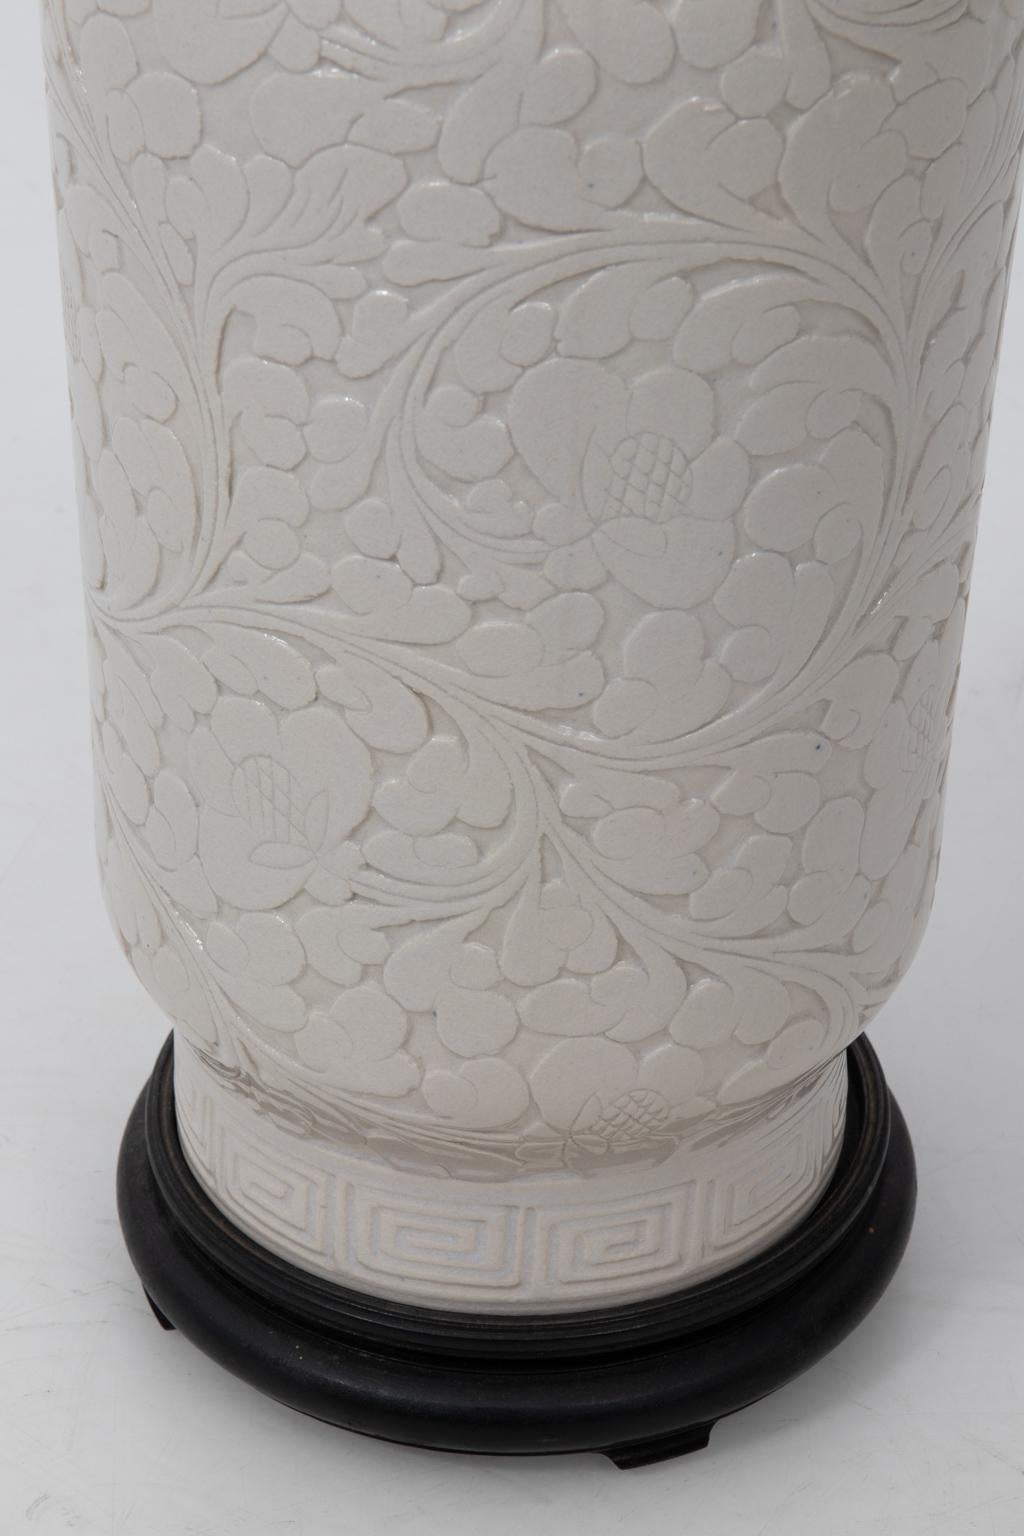 Late 20th Century Chinese White Pottery Vase